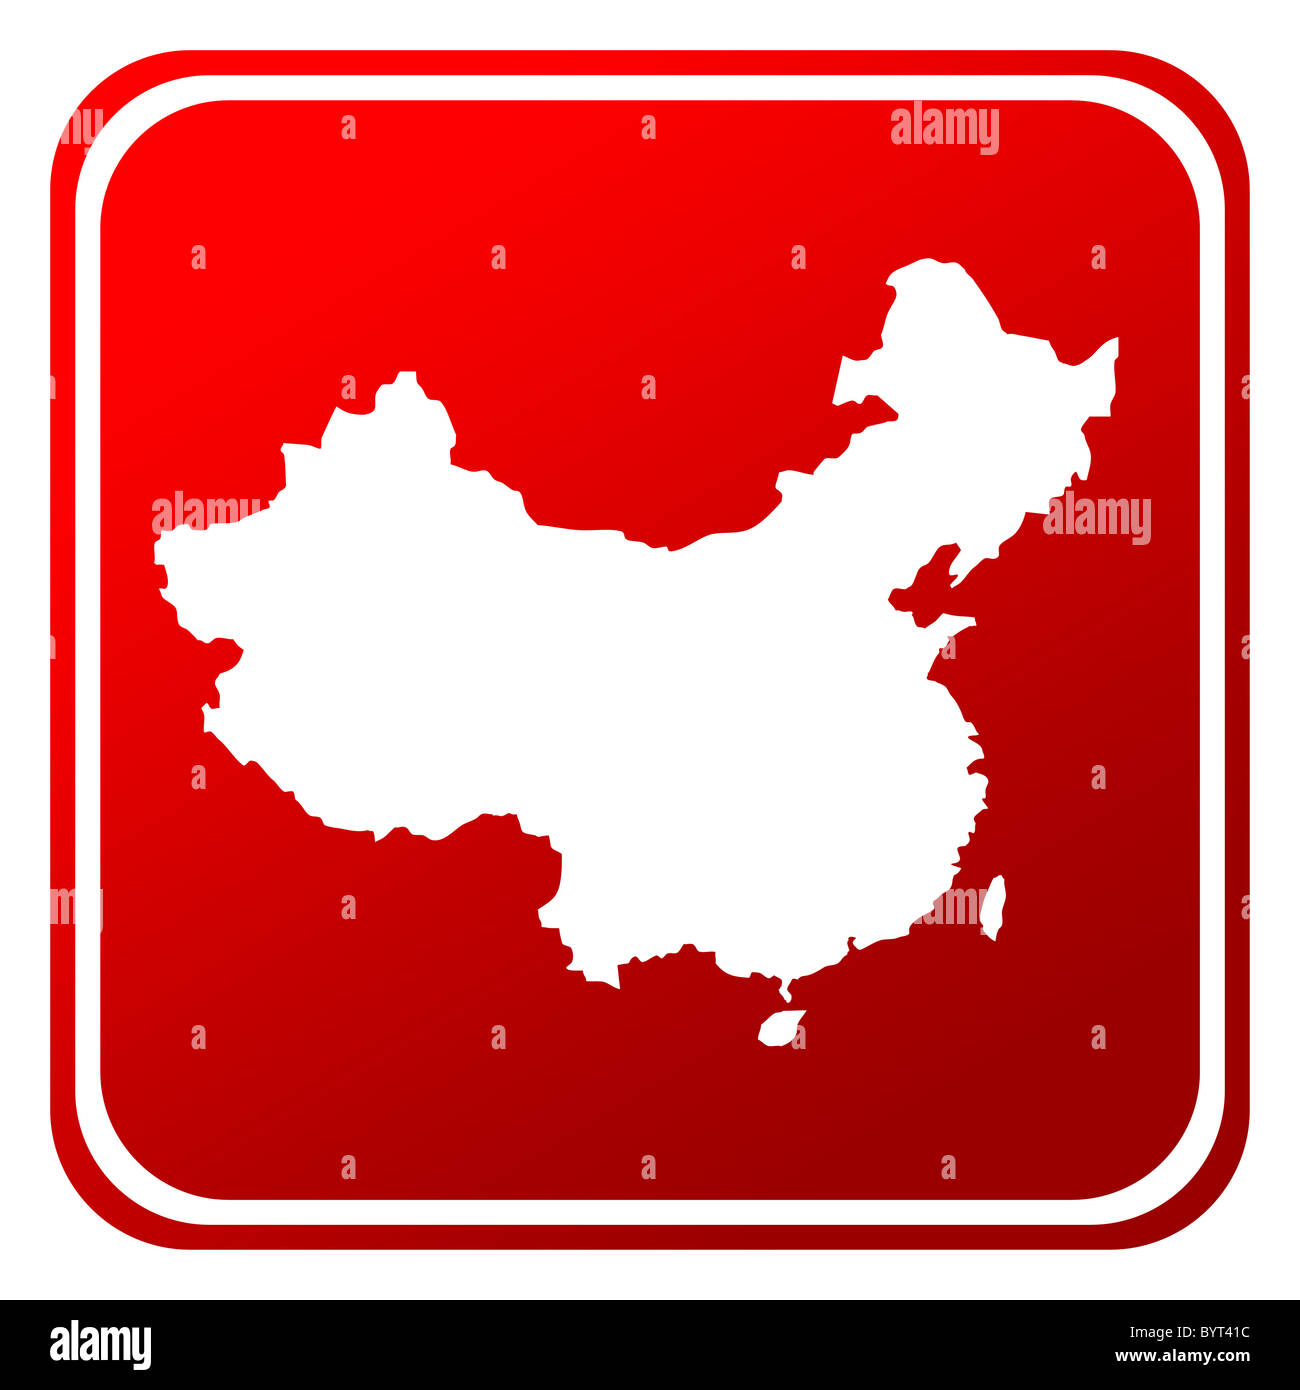 Red China map button isolated on white background. Stock Photo